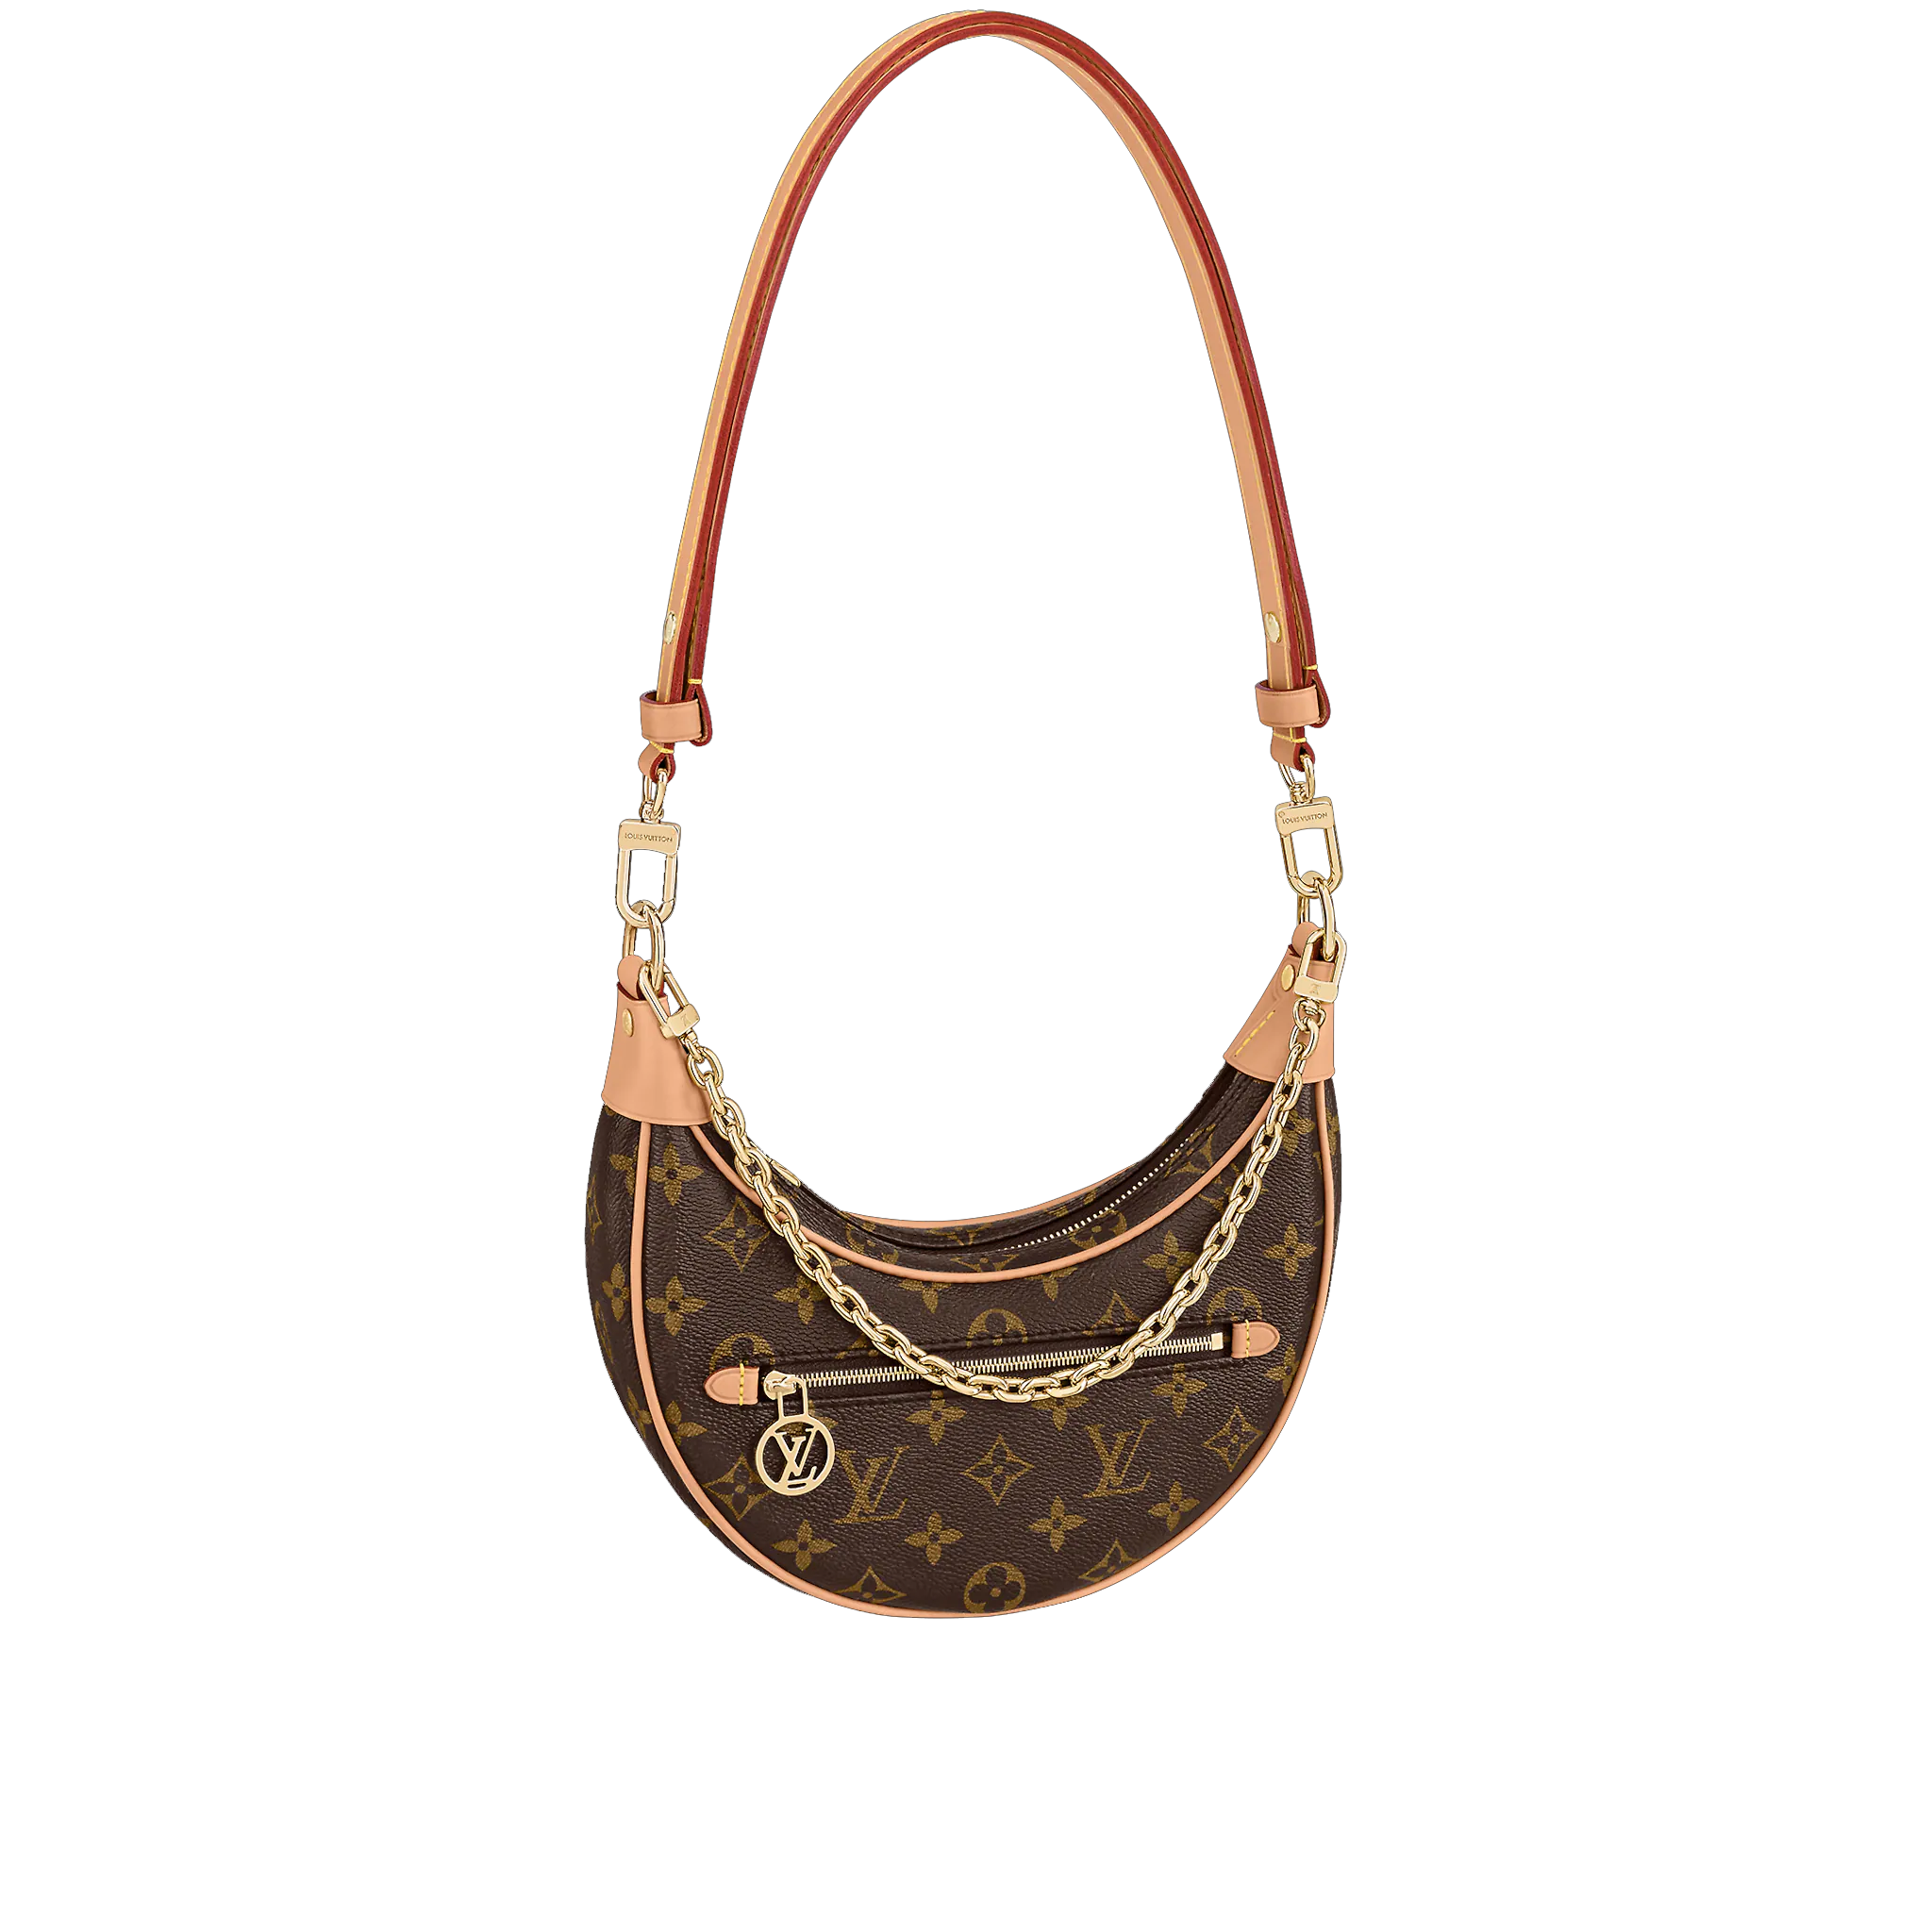 LV Has Finally Launched A Half-Moon Bag And It's Brilliant!